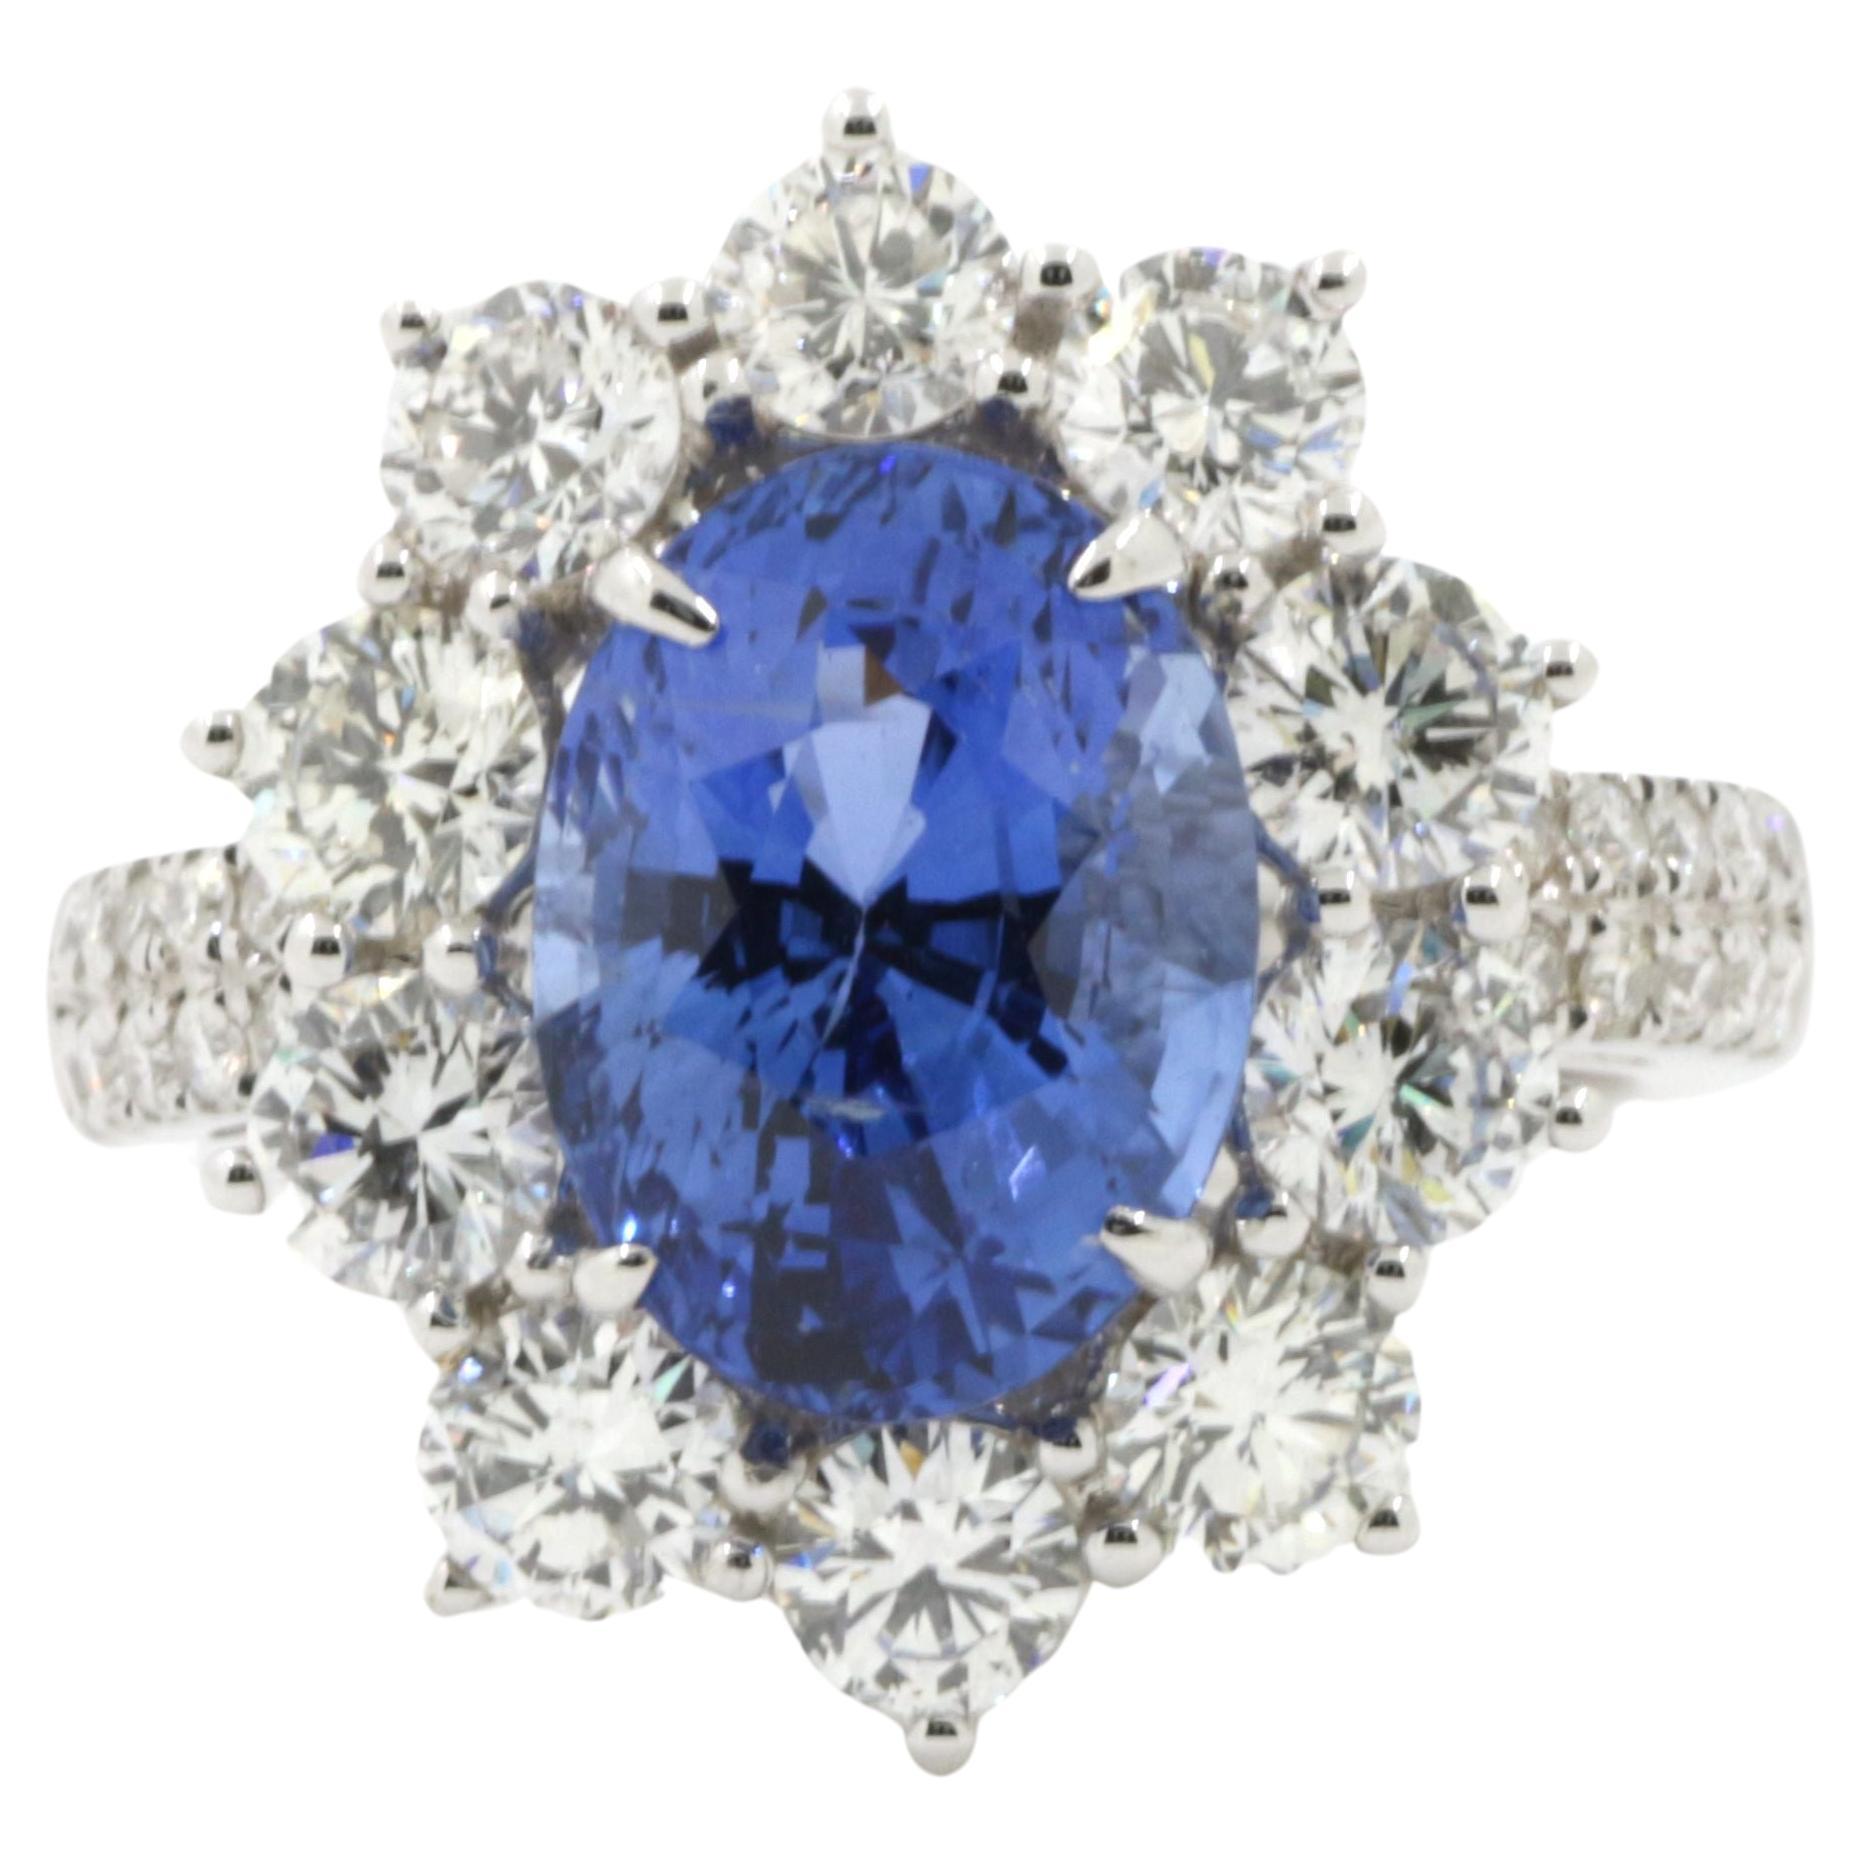 GRS Certified 5.55 Carat Blue Sapphire and Diamond Ring in 18K White Gold